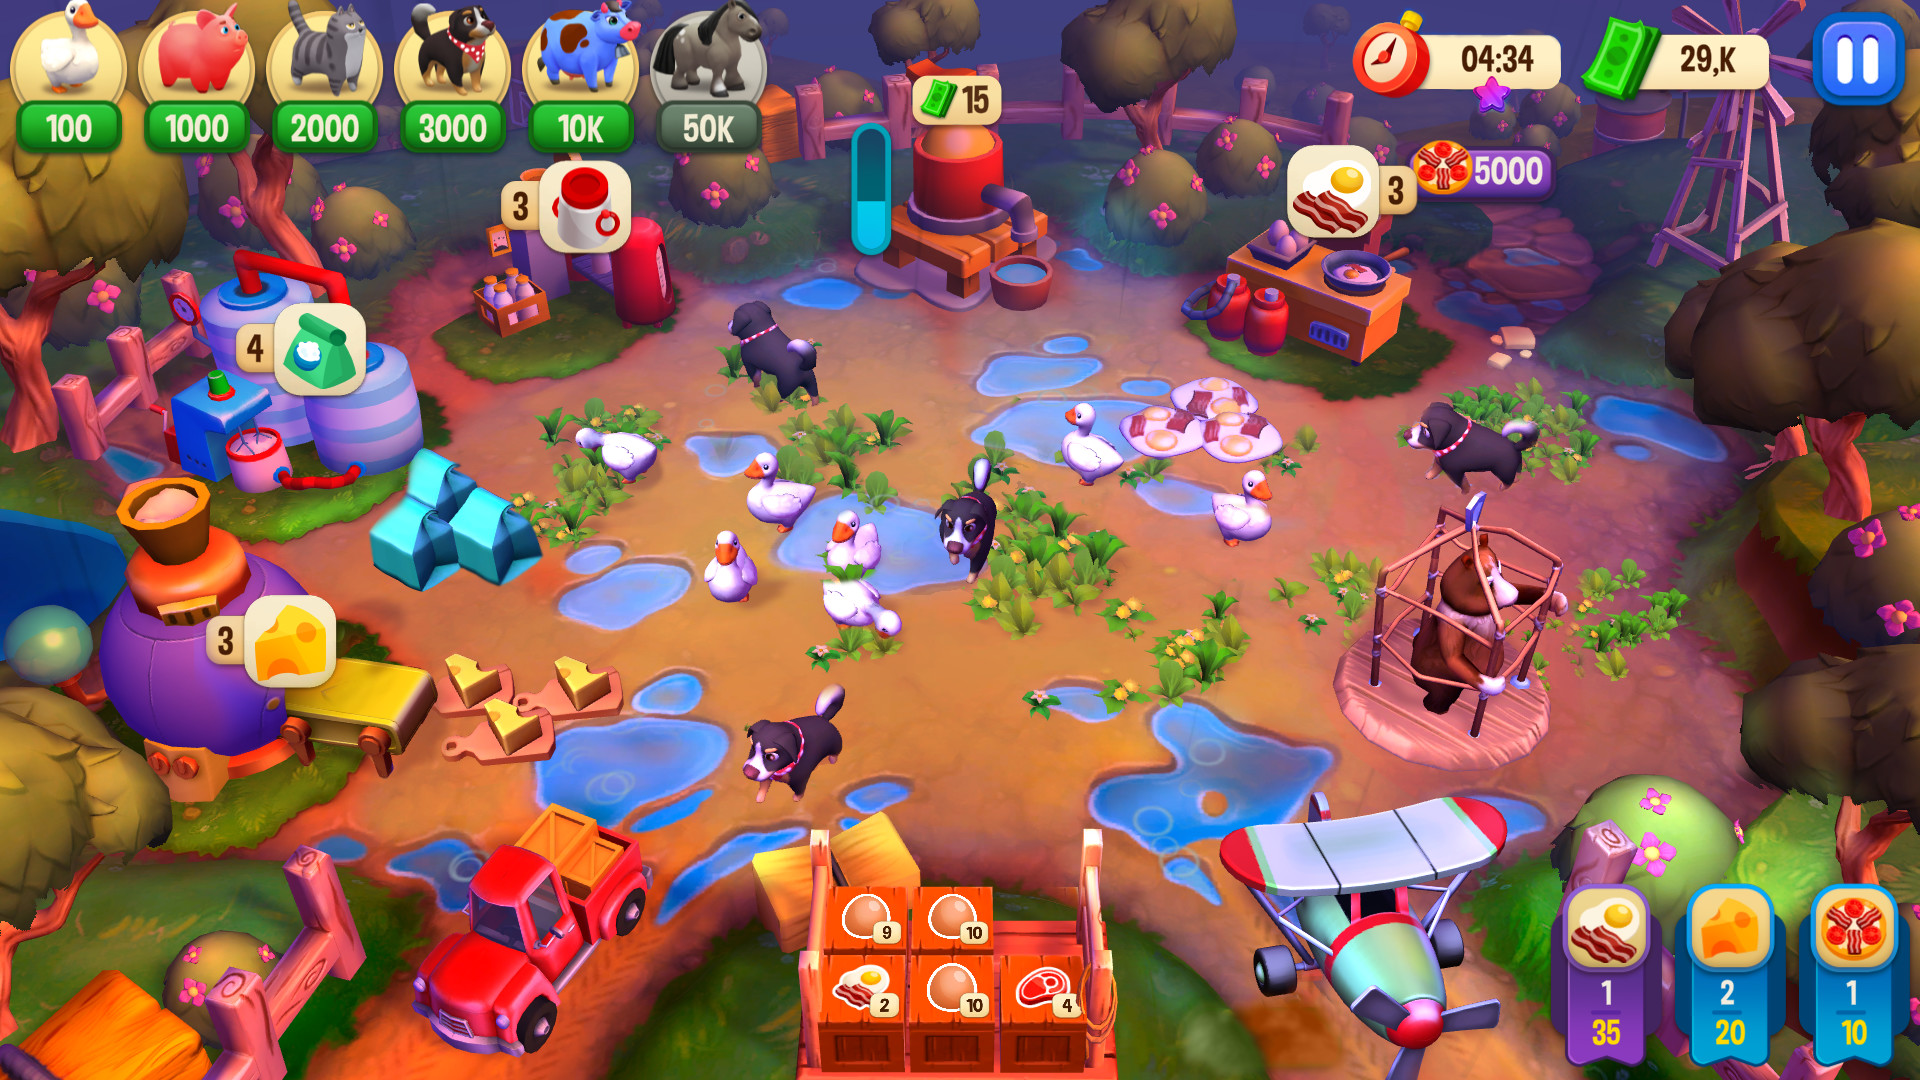 farm frenzy game restarts my android tablet